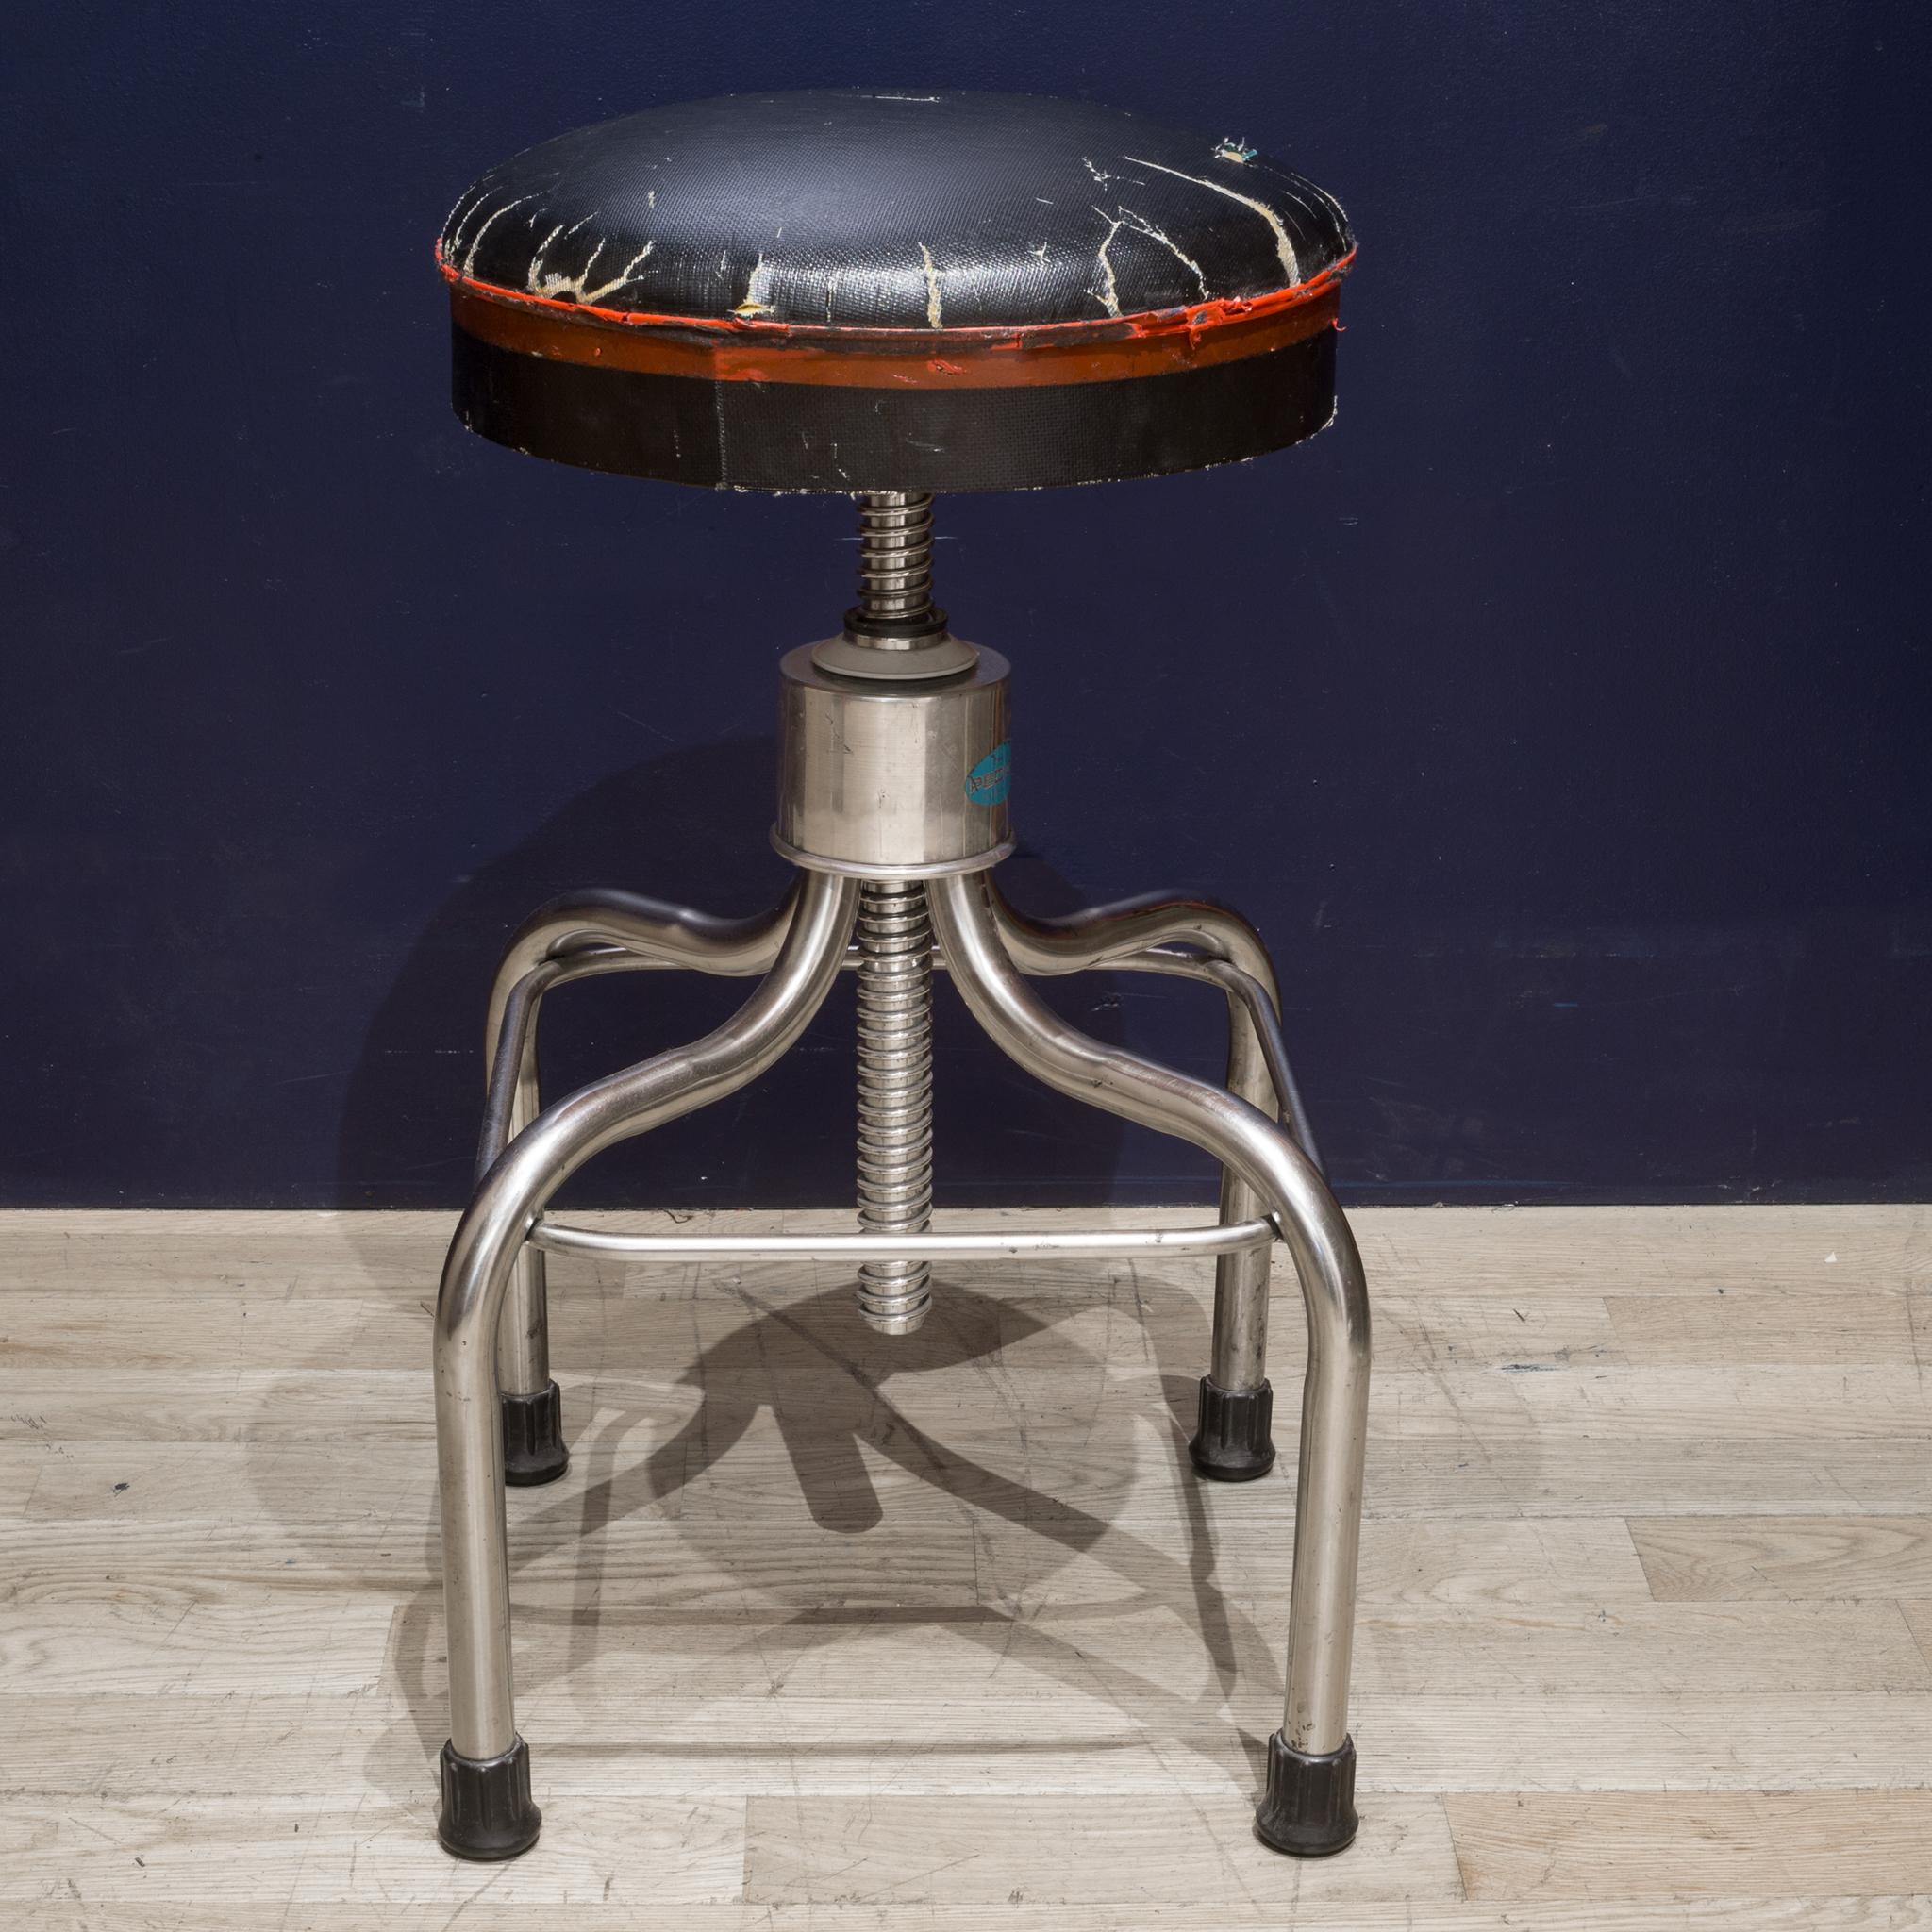 About

An adjustable chrome medical swivel stool with a distressed seat. This stool has retained much of its original finish and is sturdy and structurally sound.

Creator Pedigo.
Date of manufacture circa 1993.
Materials and techniques